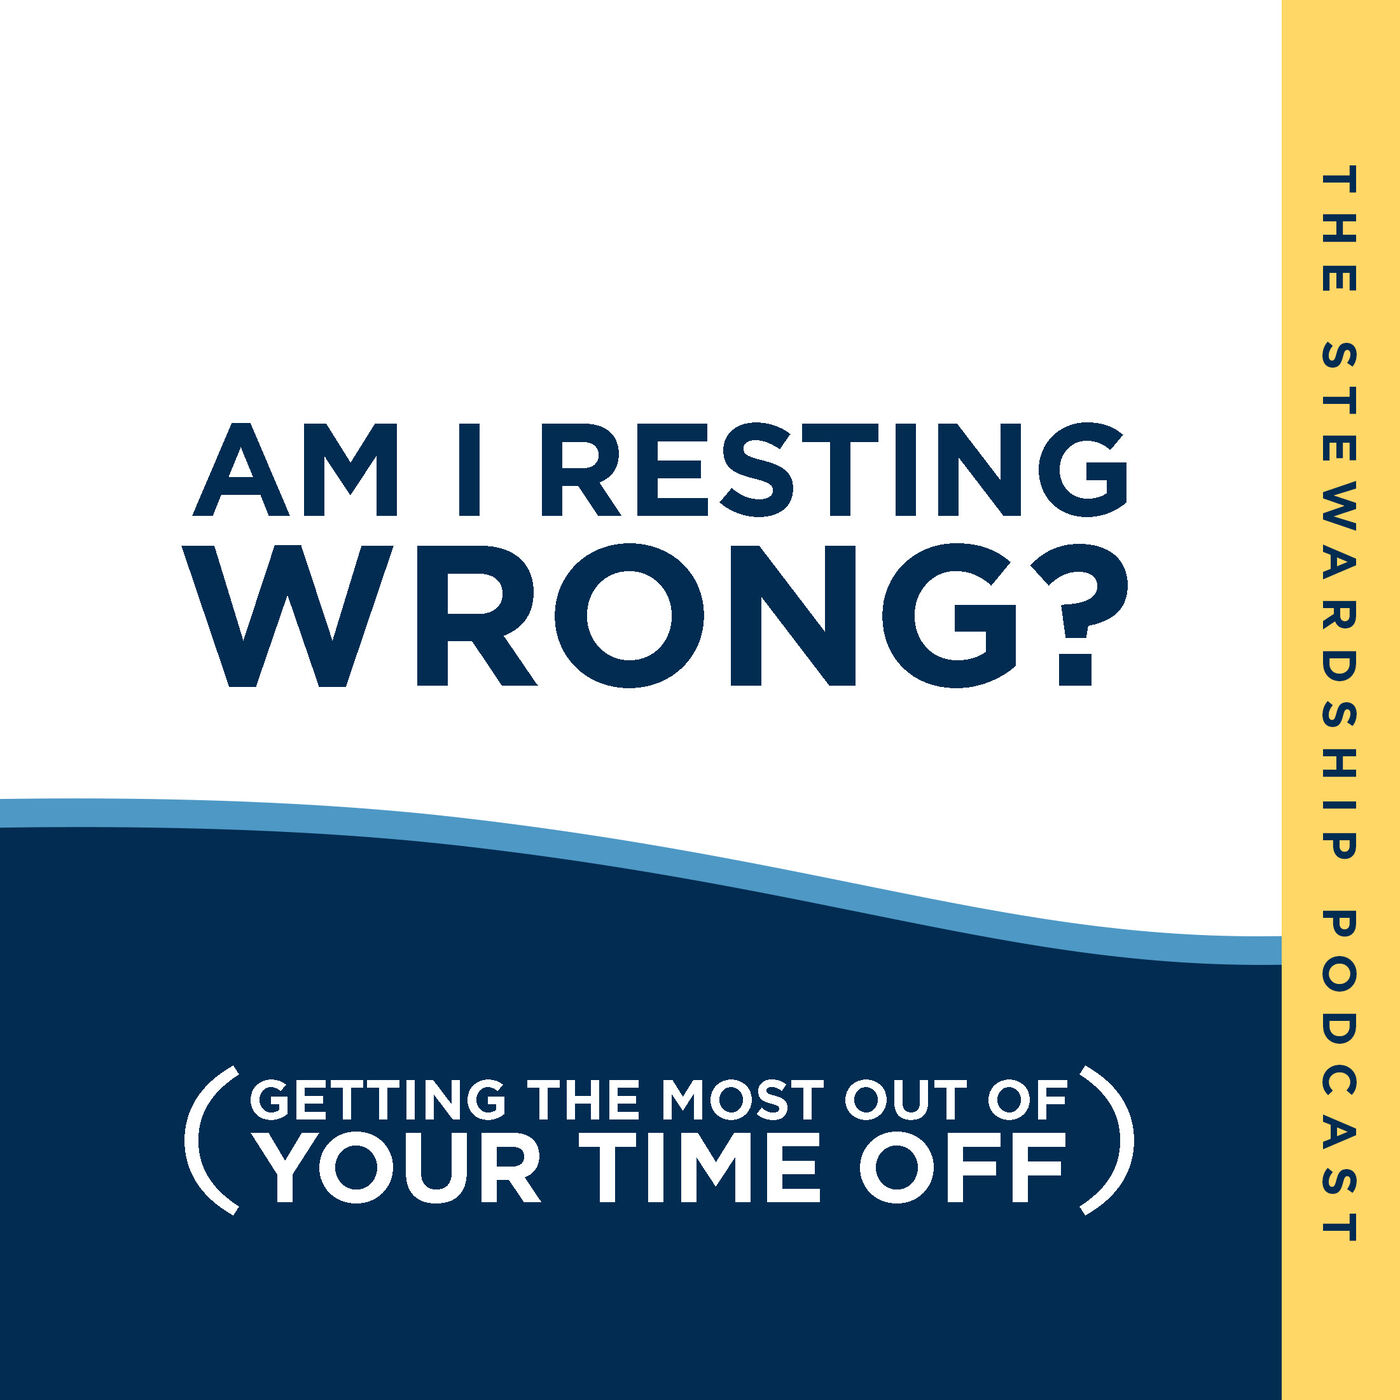 "Am I Resting Wrong?" | Making the Most of Your Time Off